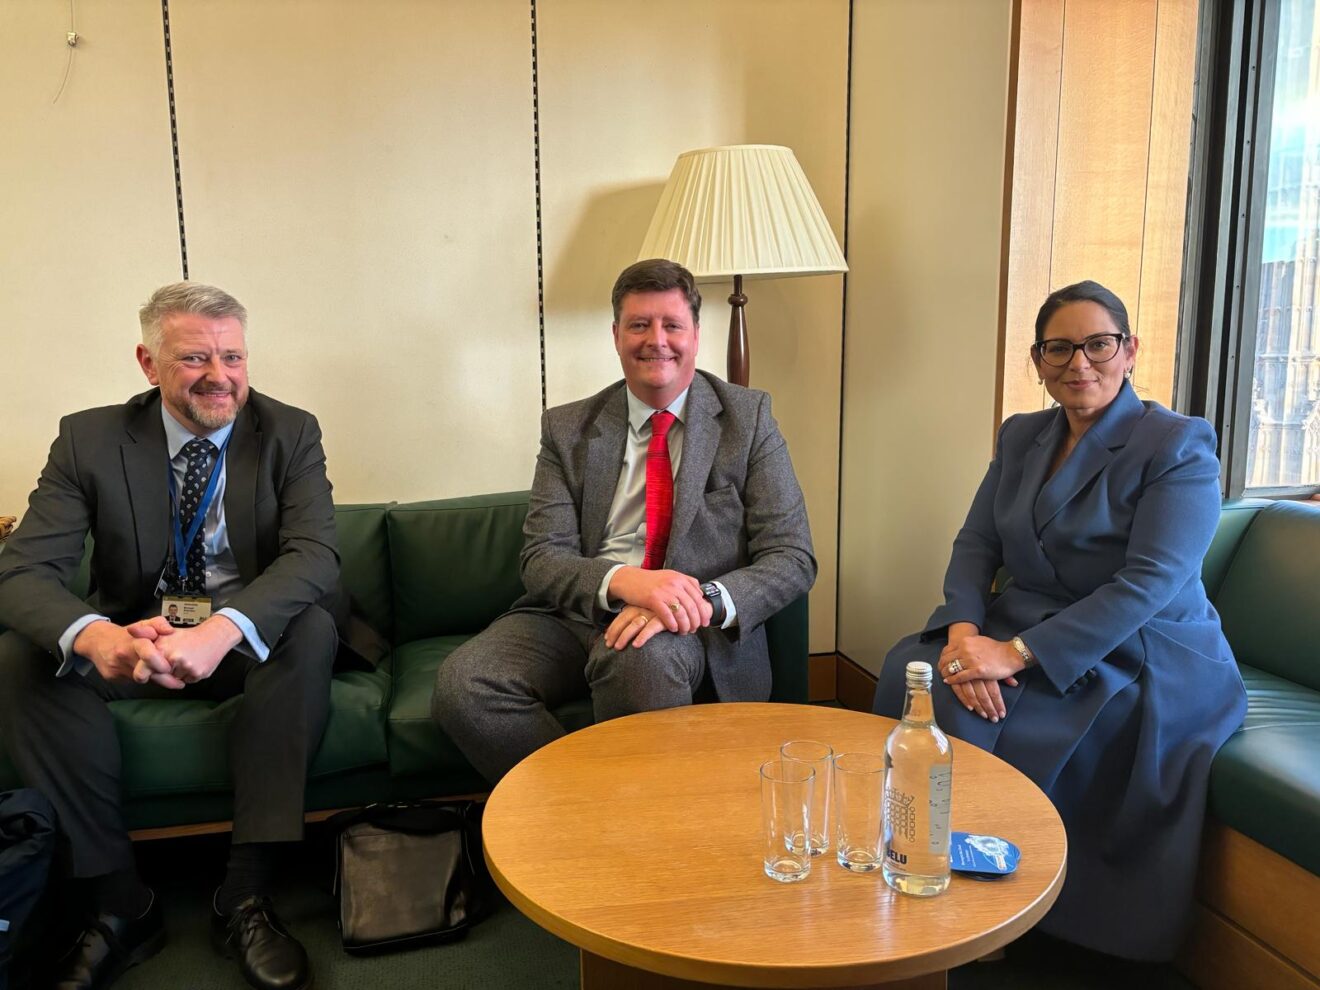 Priti meets with new Ofsted Chief Inspector